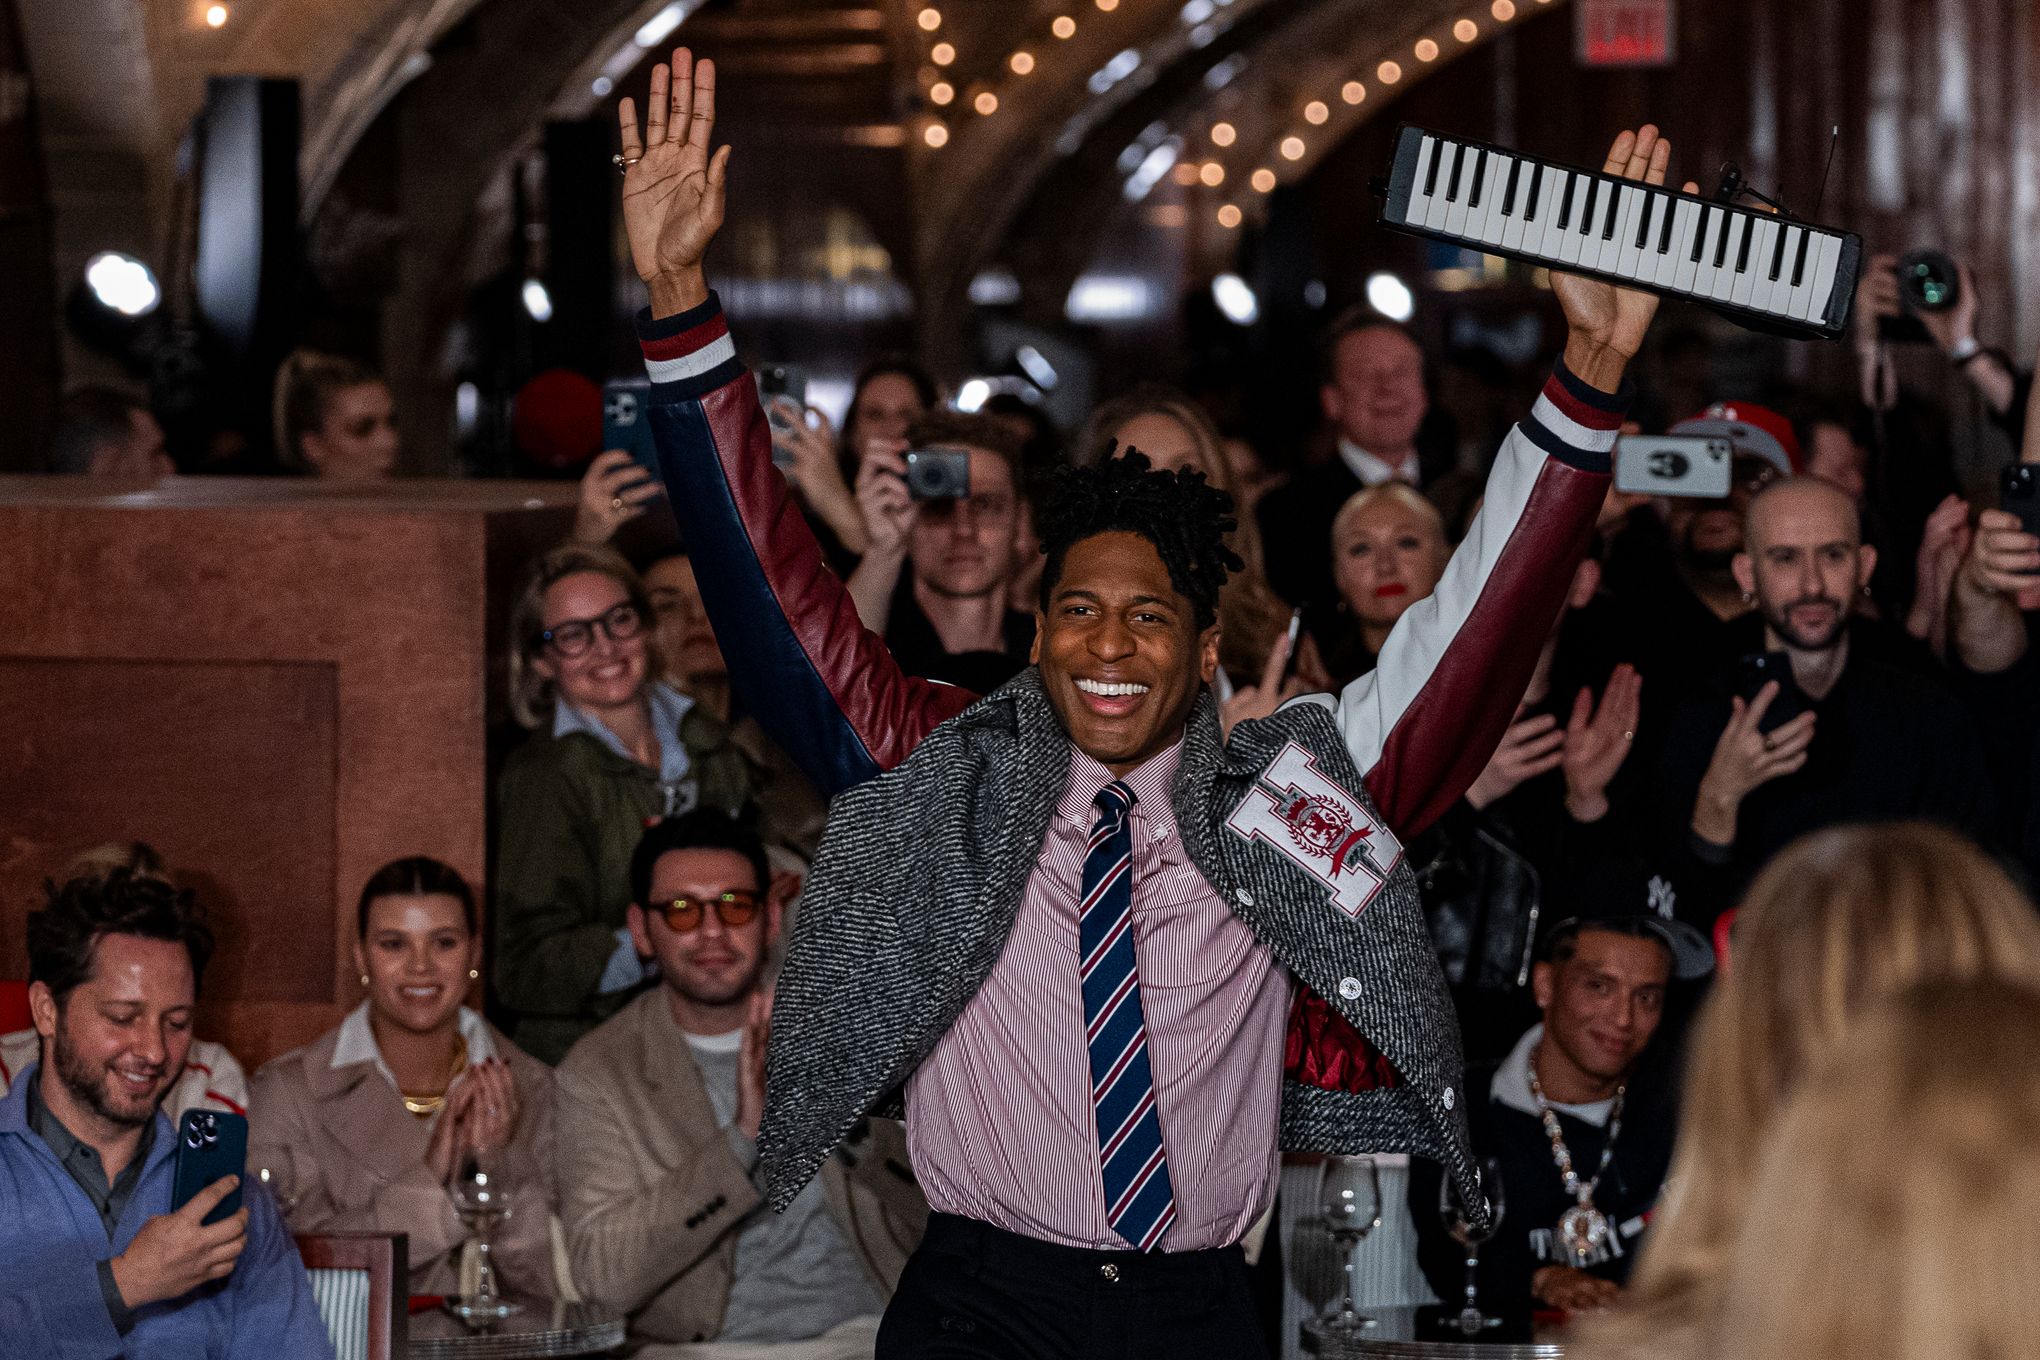 Tommy Hilfiger takes over the Oyster Bar in Grand Central for a